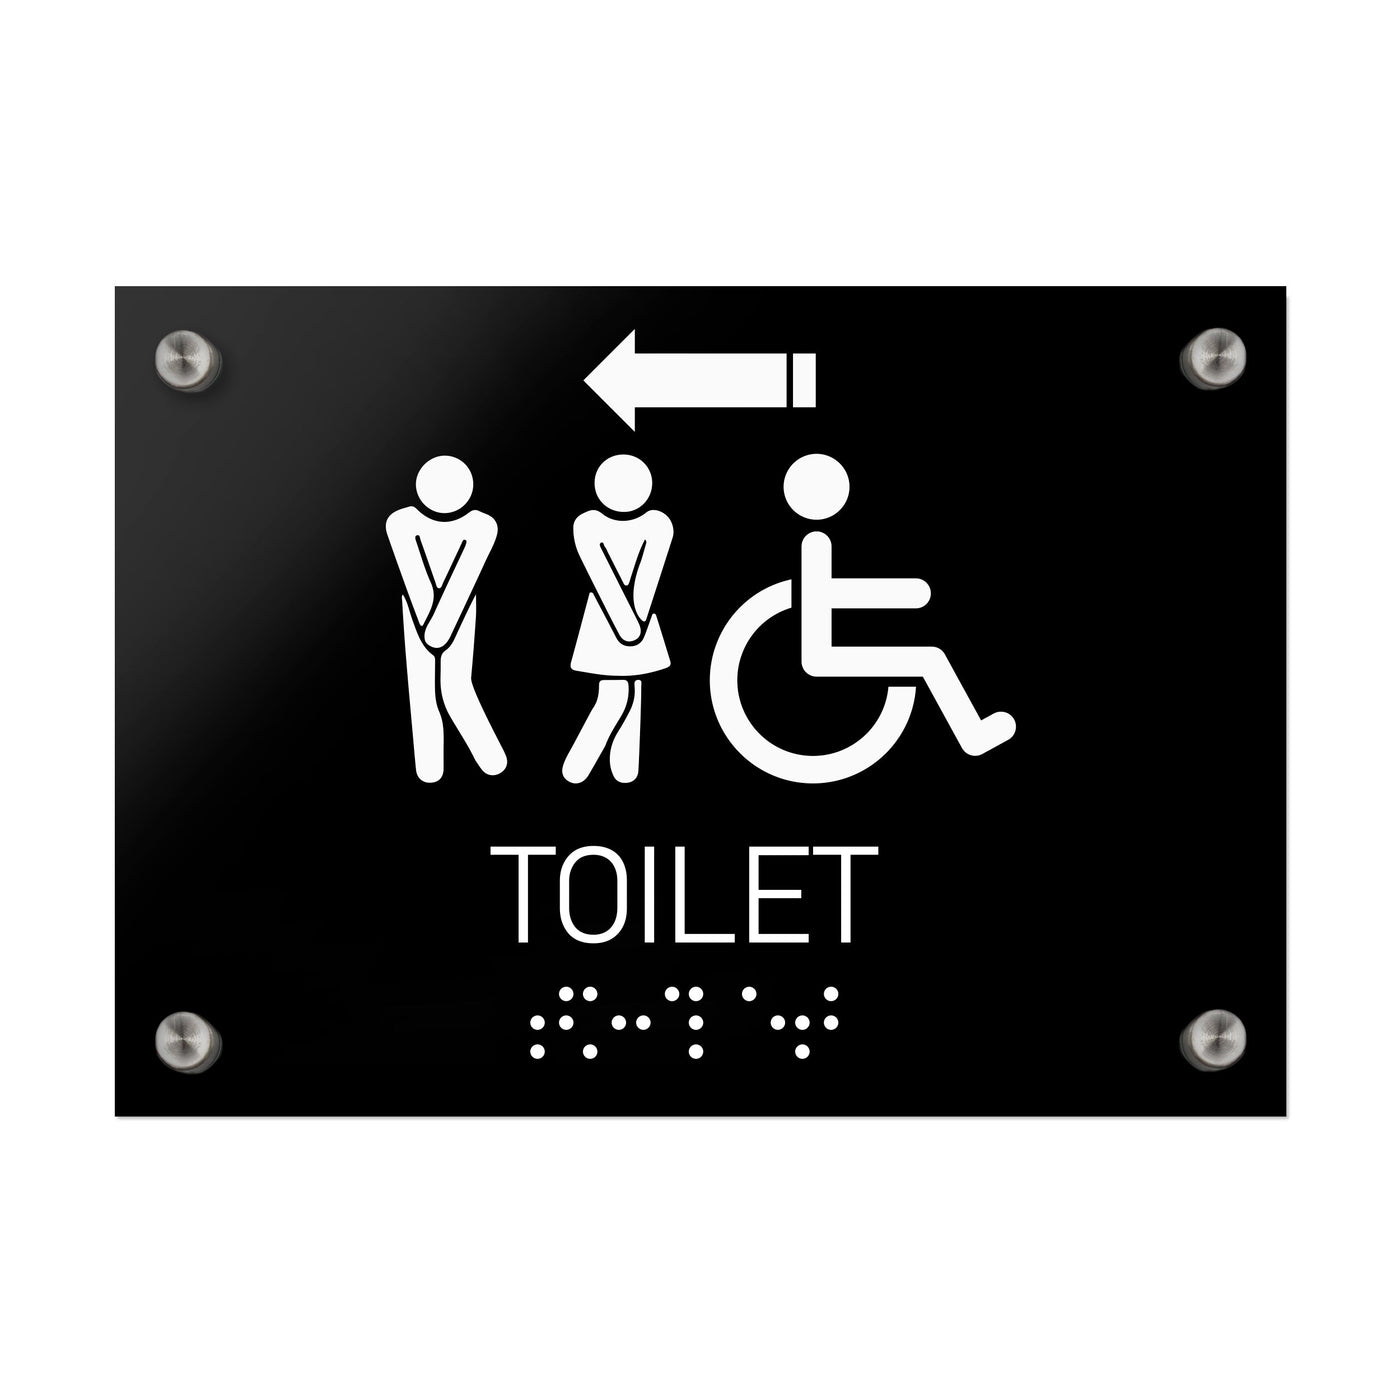 Bathroom Signs - All Gender With Weelchair Directional Restroom Sign - Black Acrylic